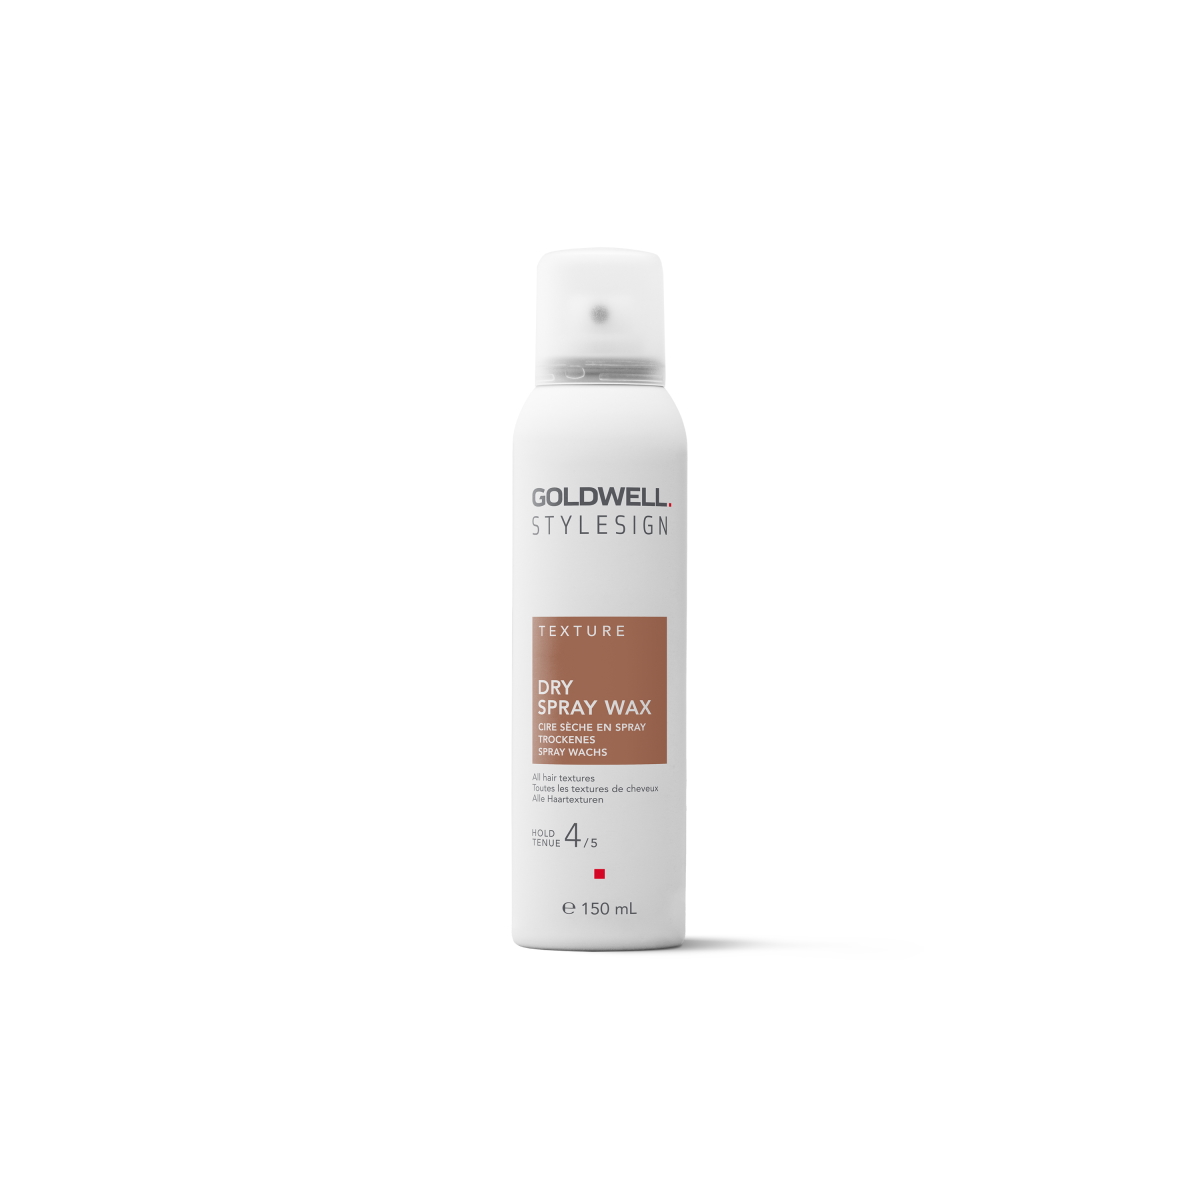 Goldwell Style Sign Texture Dry Spray Wax 150ml